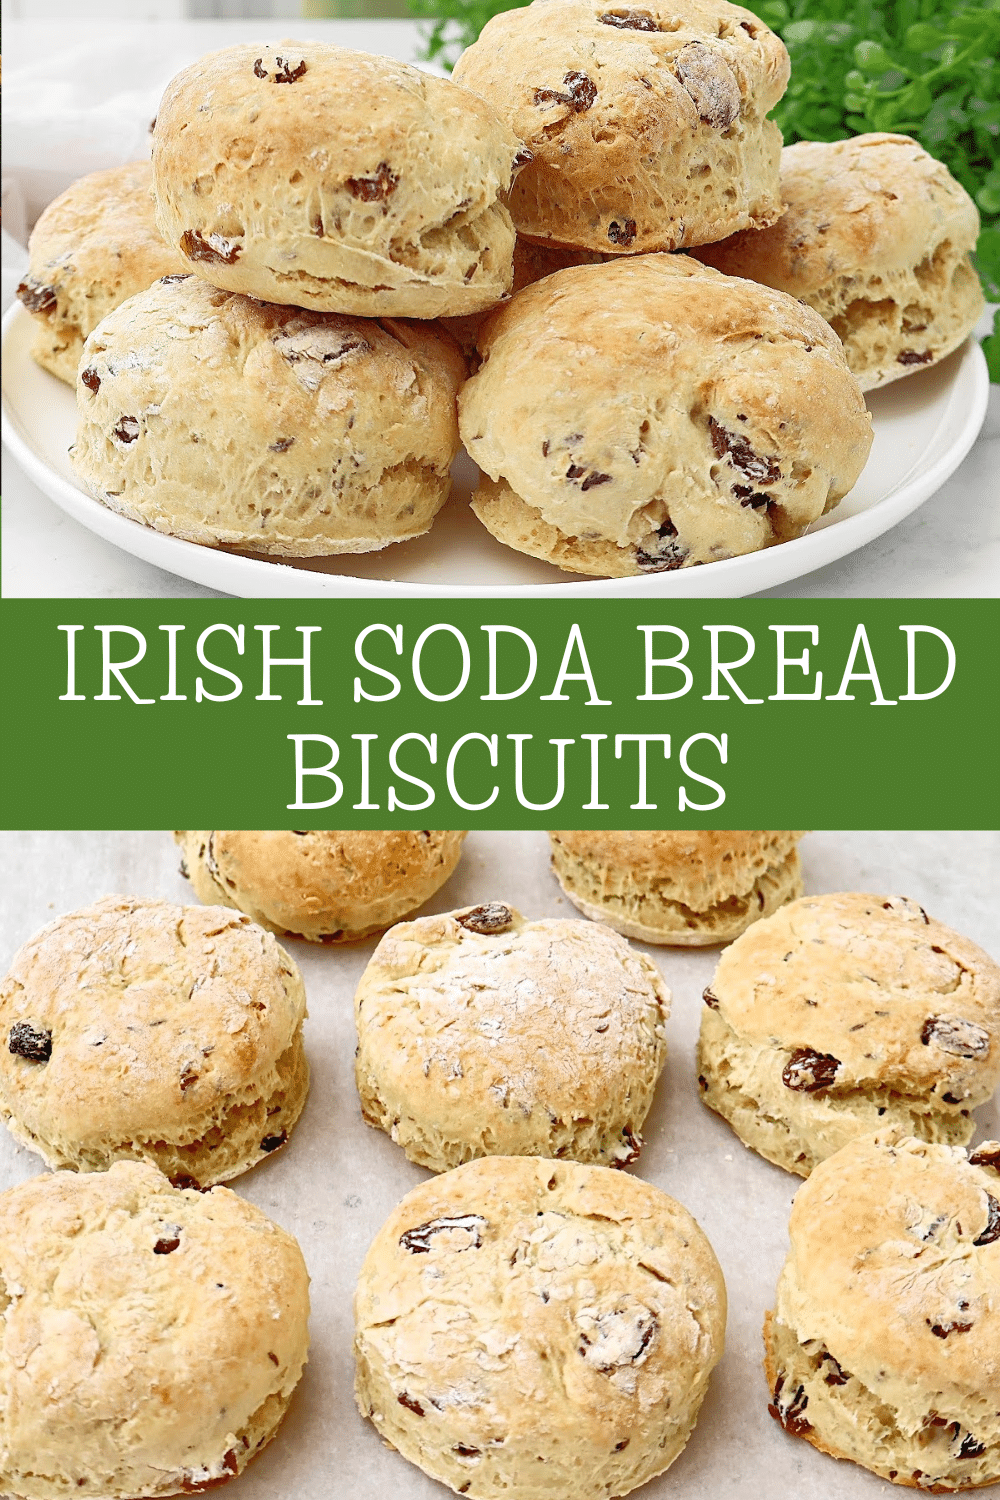 Irish Soda Bread Biscuits ~ Perfectly portioned biscuits inspired by classic Irish soda bread. Vegetarian and vegan. via @thiswifecooks